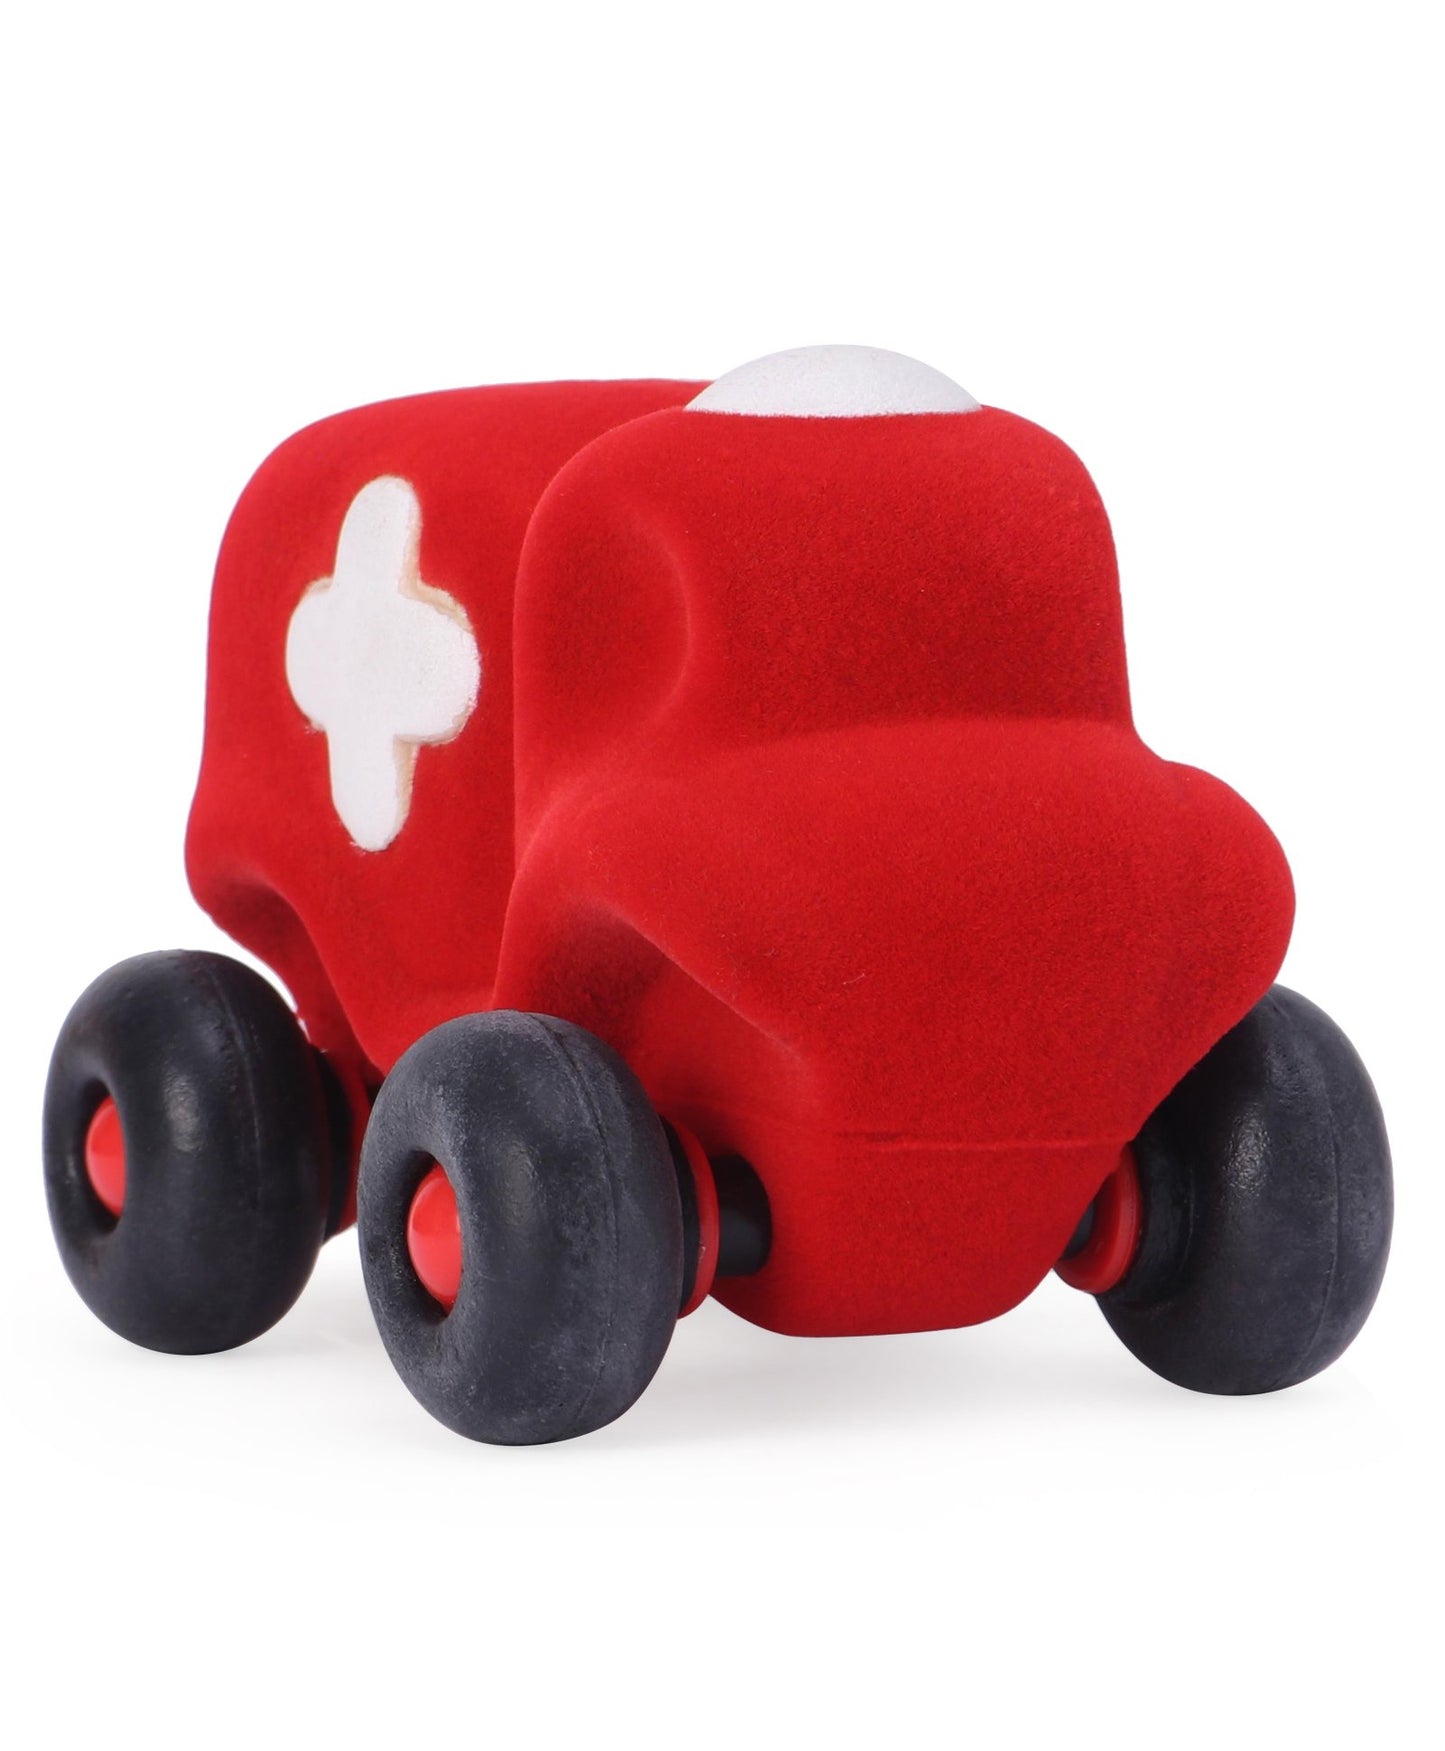 Rubbabu Free Wheel Little Vehicles - Pack of 8 (Colour May Vary)